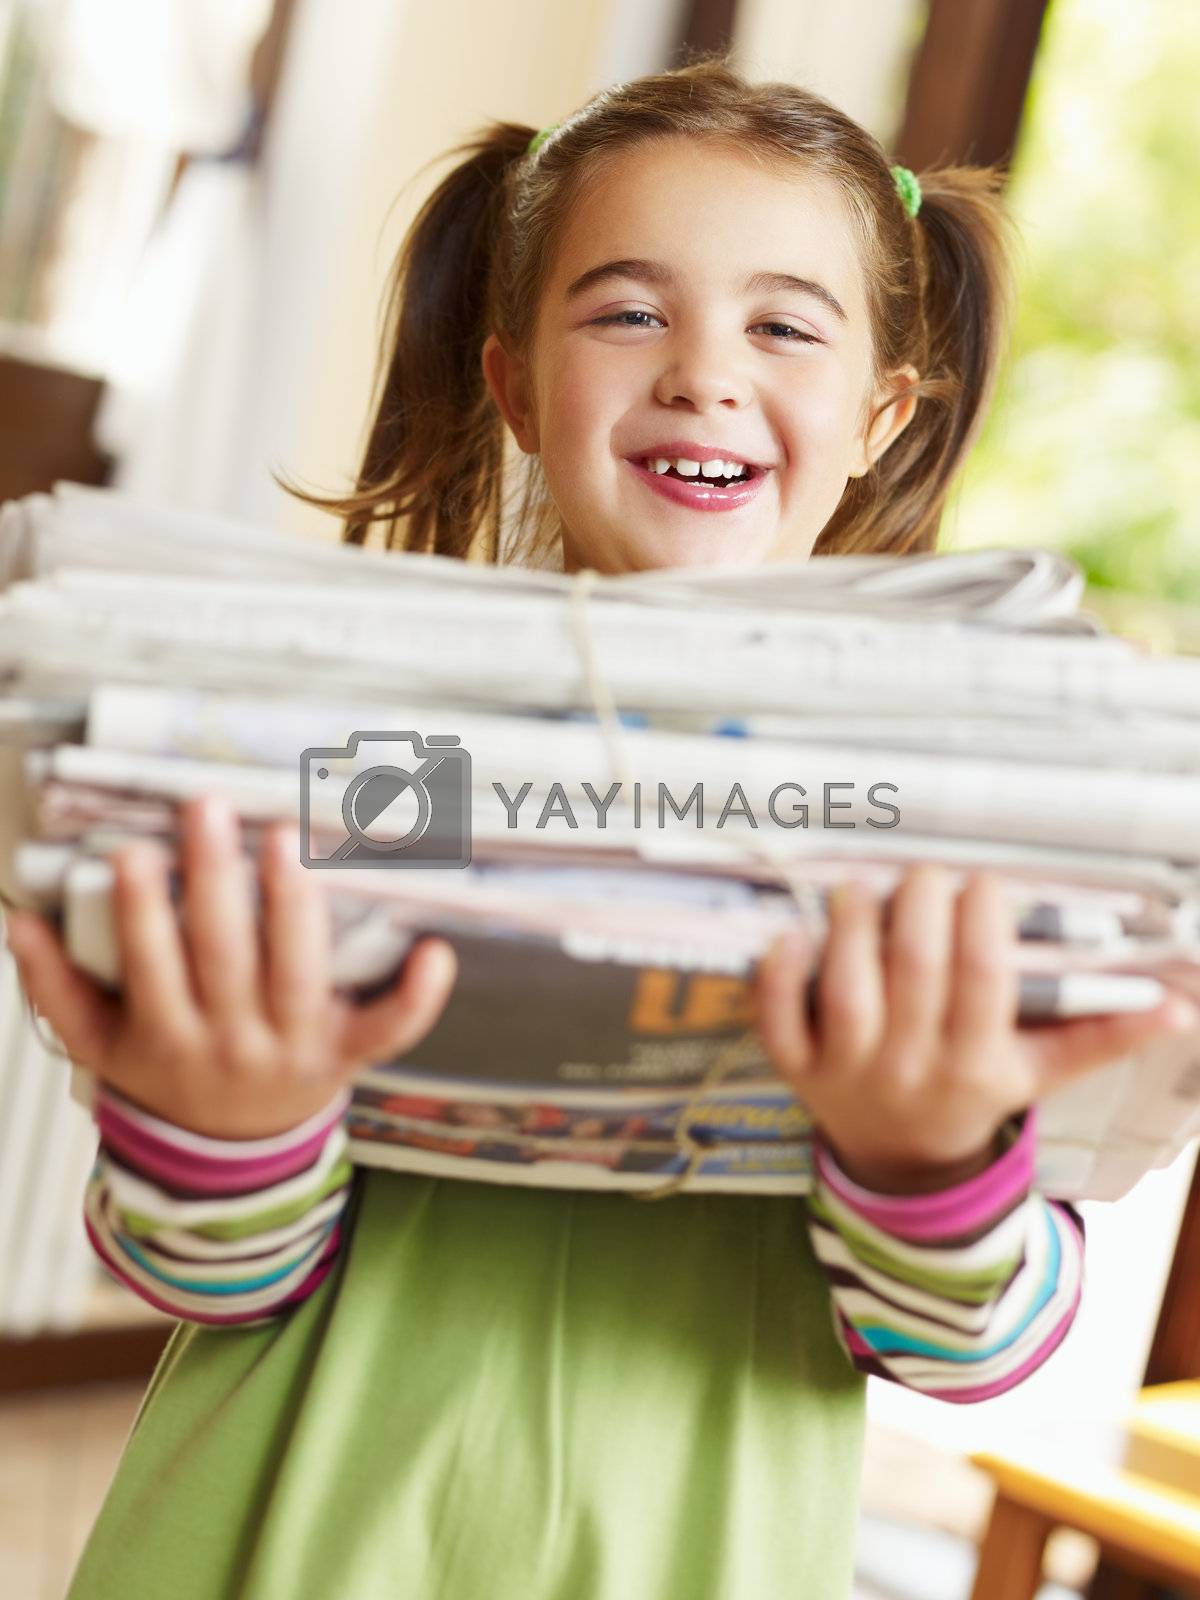 Royalty free image of girl recycling newspapers by diego_cervo